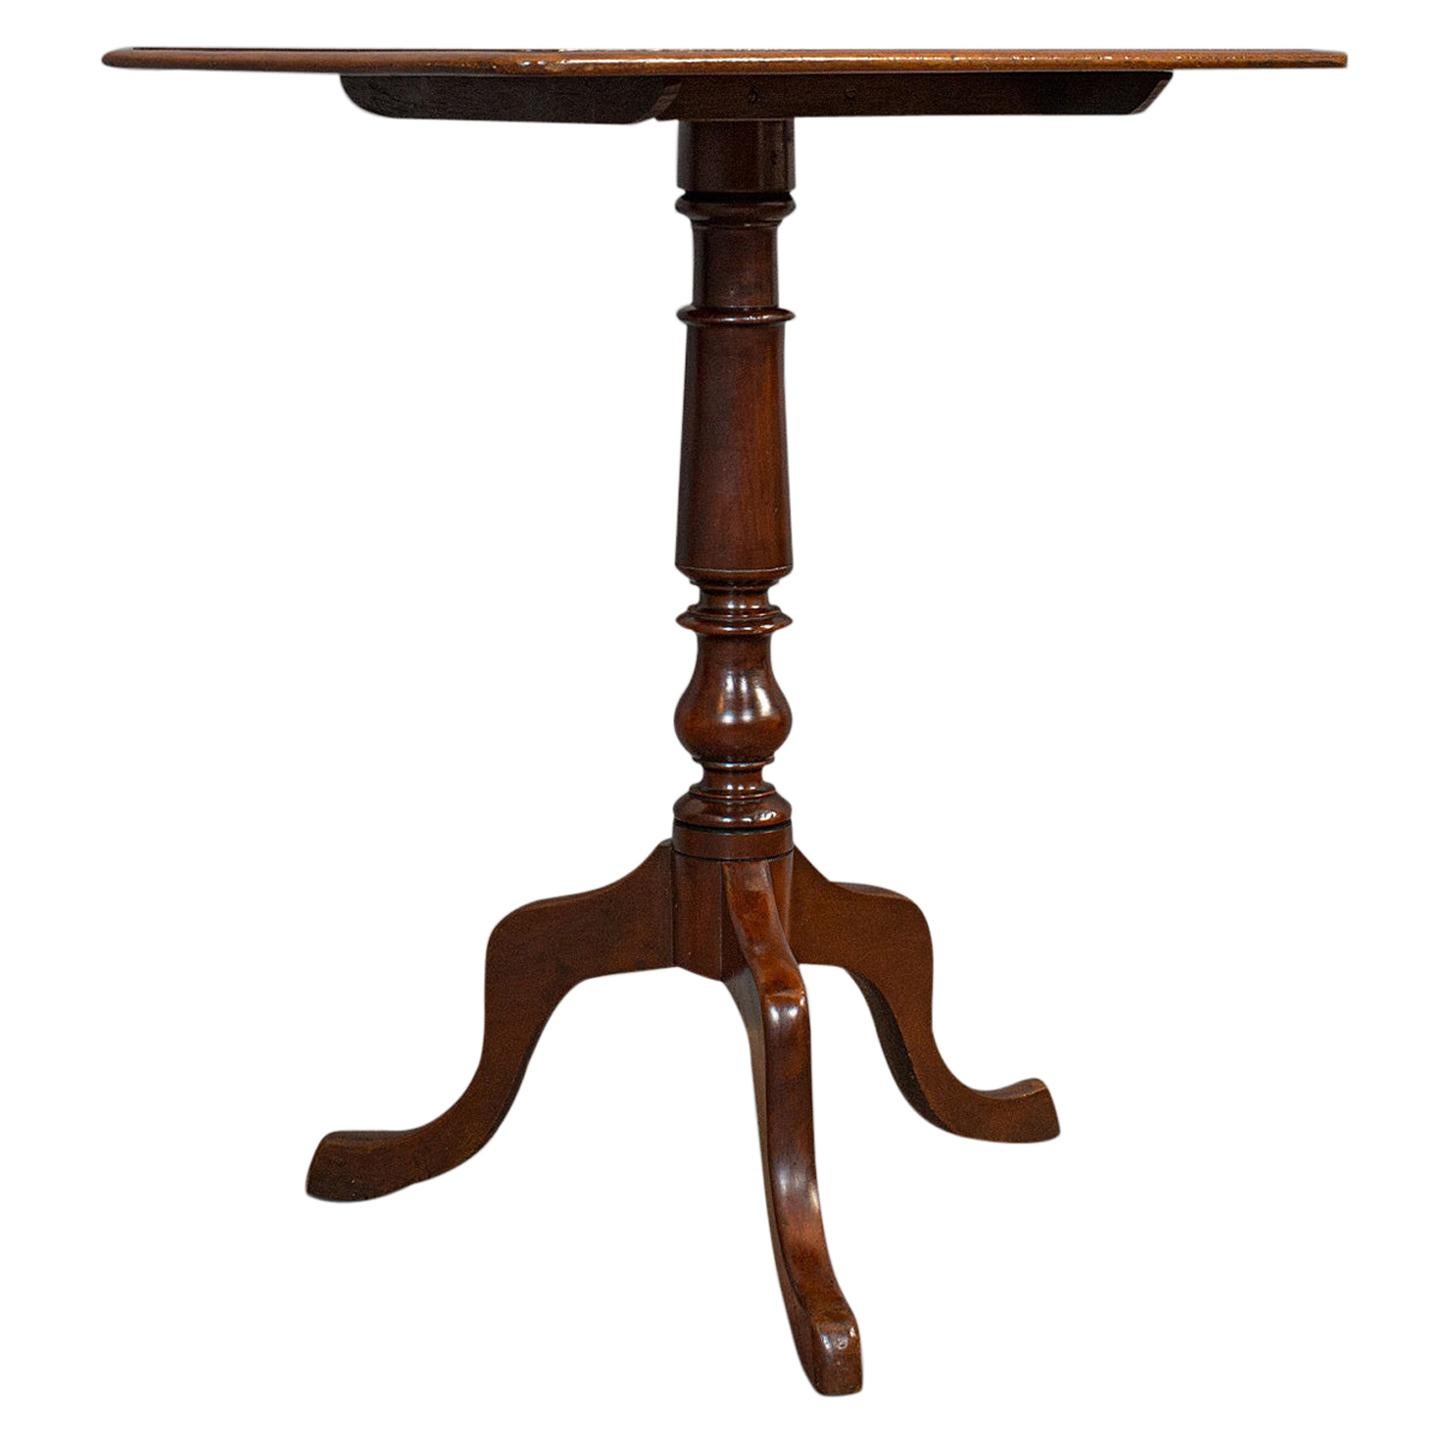 Antique Wine Table, English, Mahogany, Side, Lamp Stand, Victorian, circa 1870